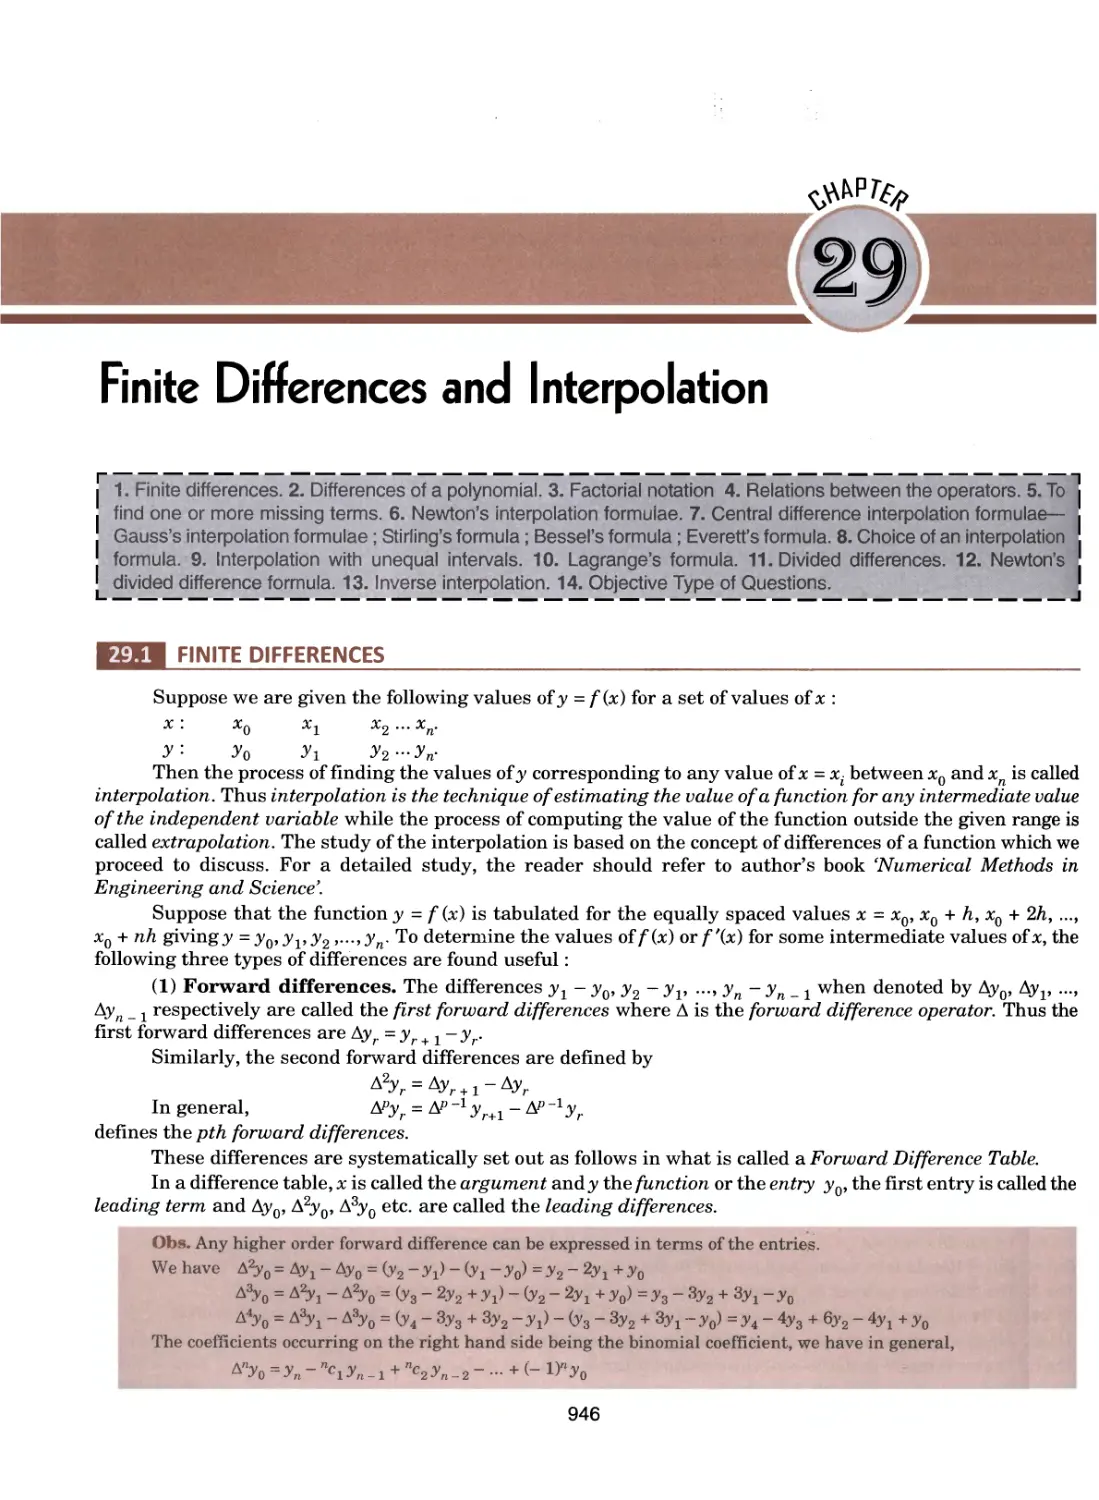 29.Finite Differences and Interpolation 946